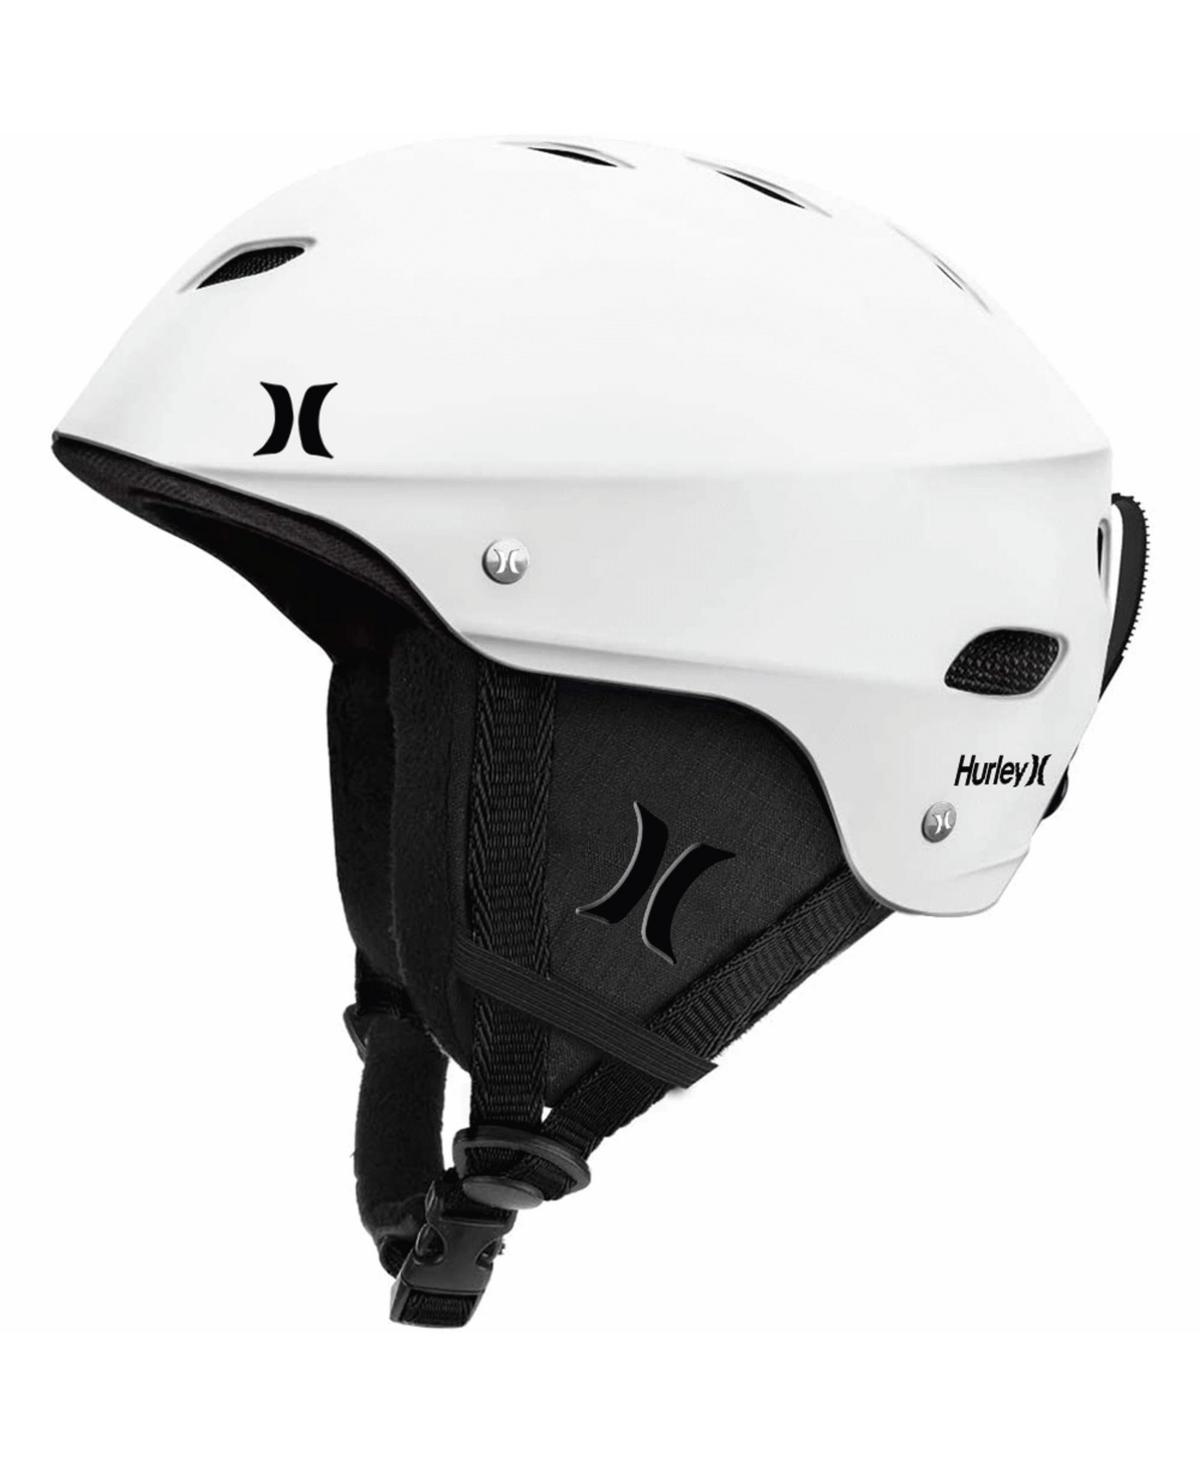 Hurley Youth Snow Helmet, Small In White